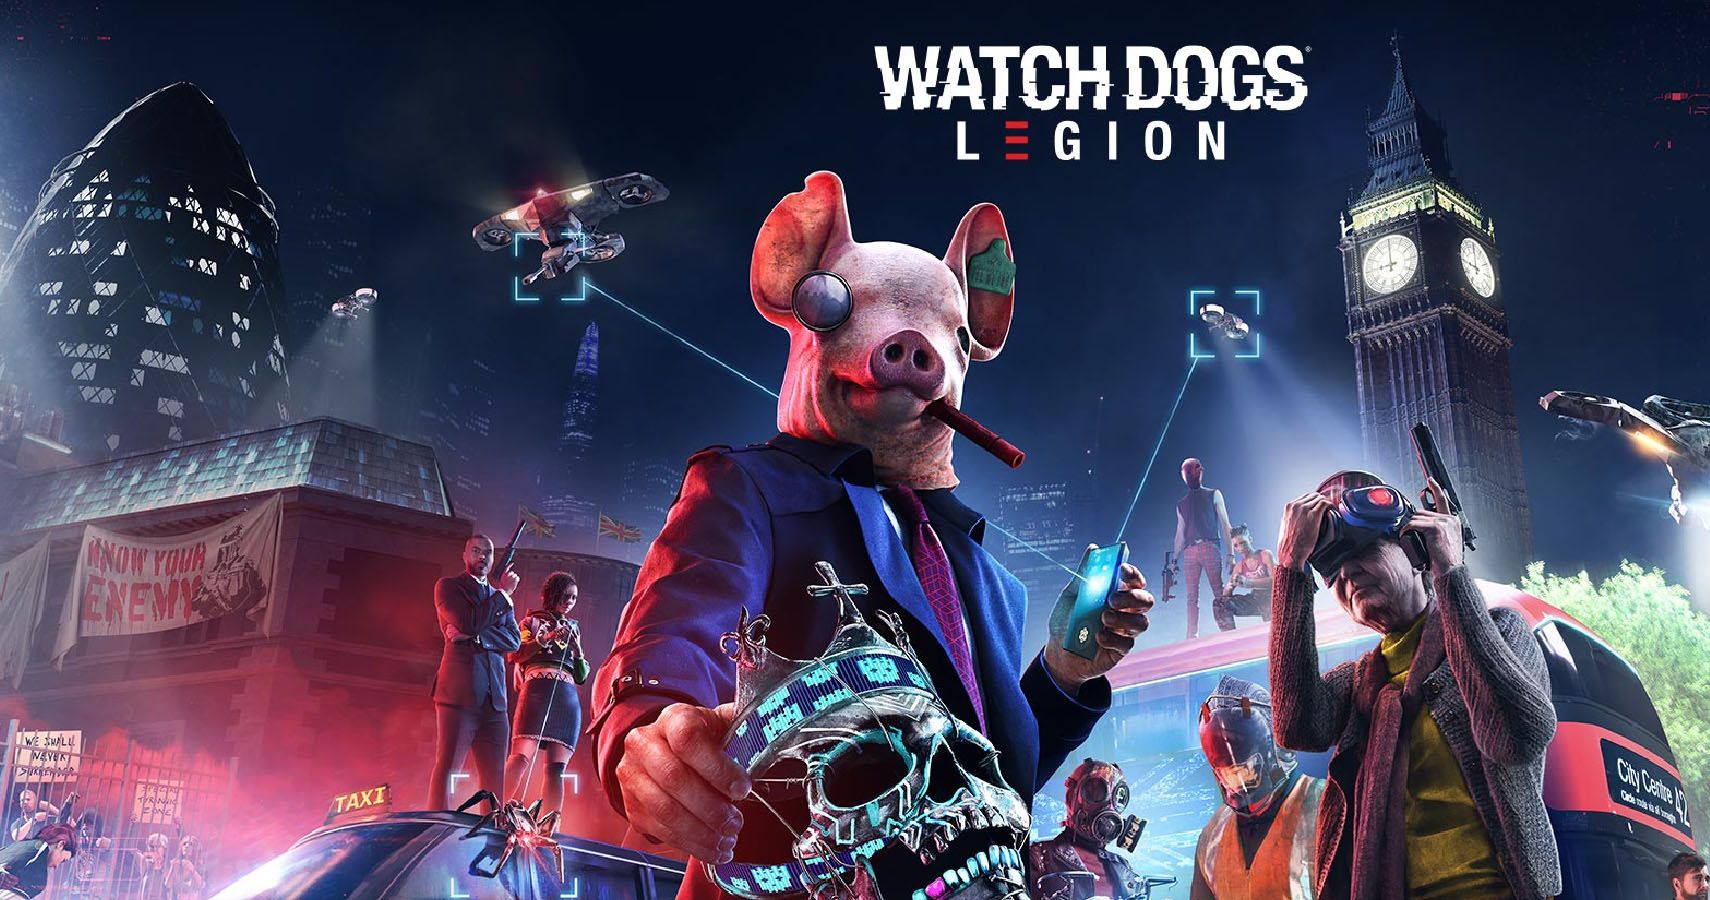 Patch update regarding Watch Dogs: Legion and announcement for the Online  mode